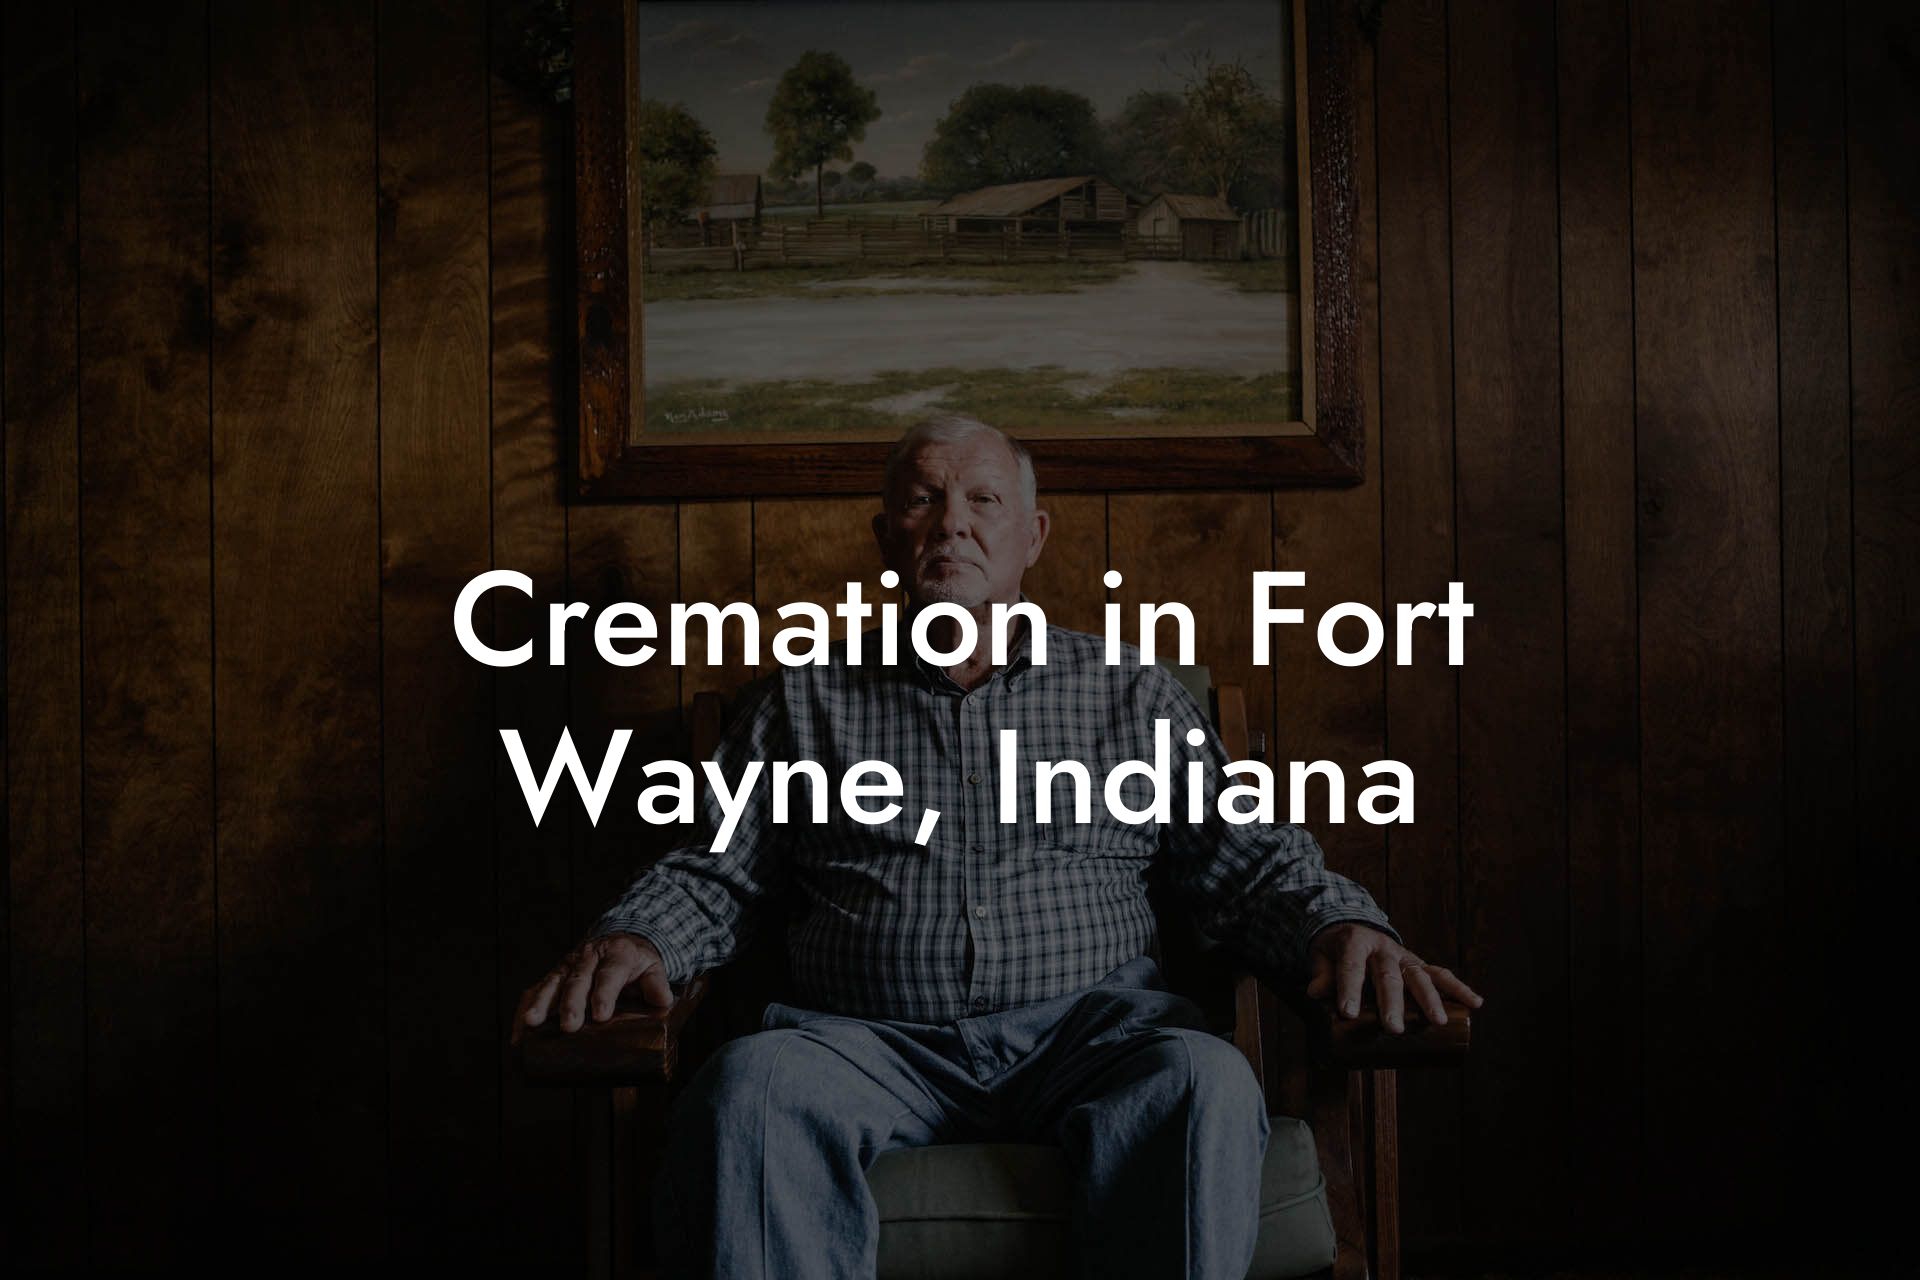 Cremation in Fort Wayne, Indiana